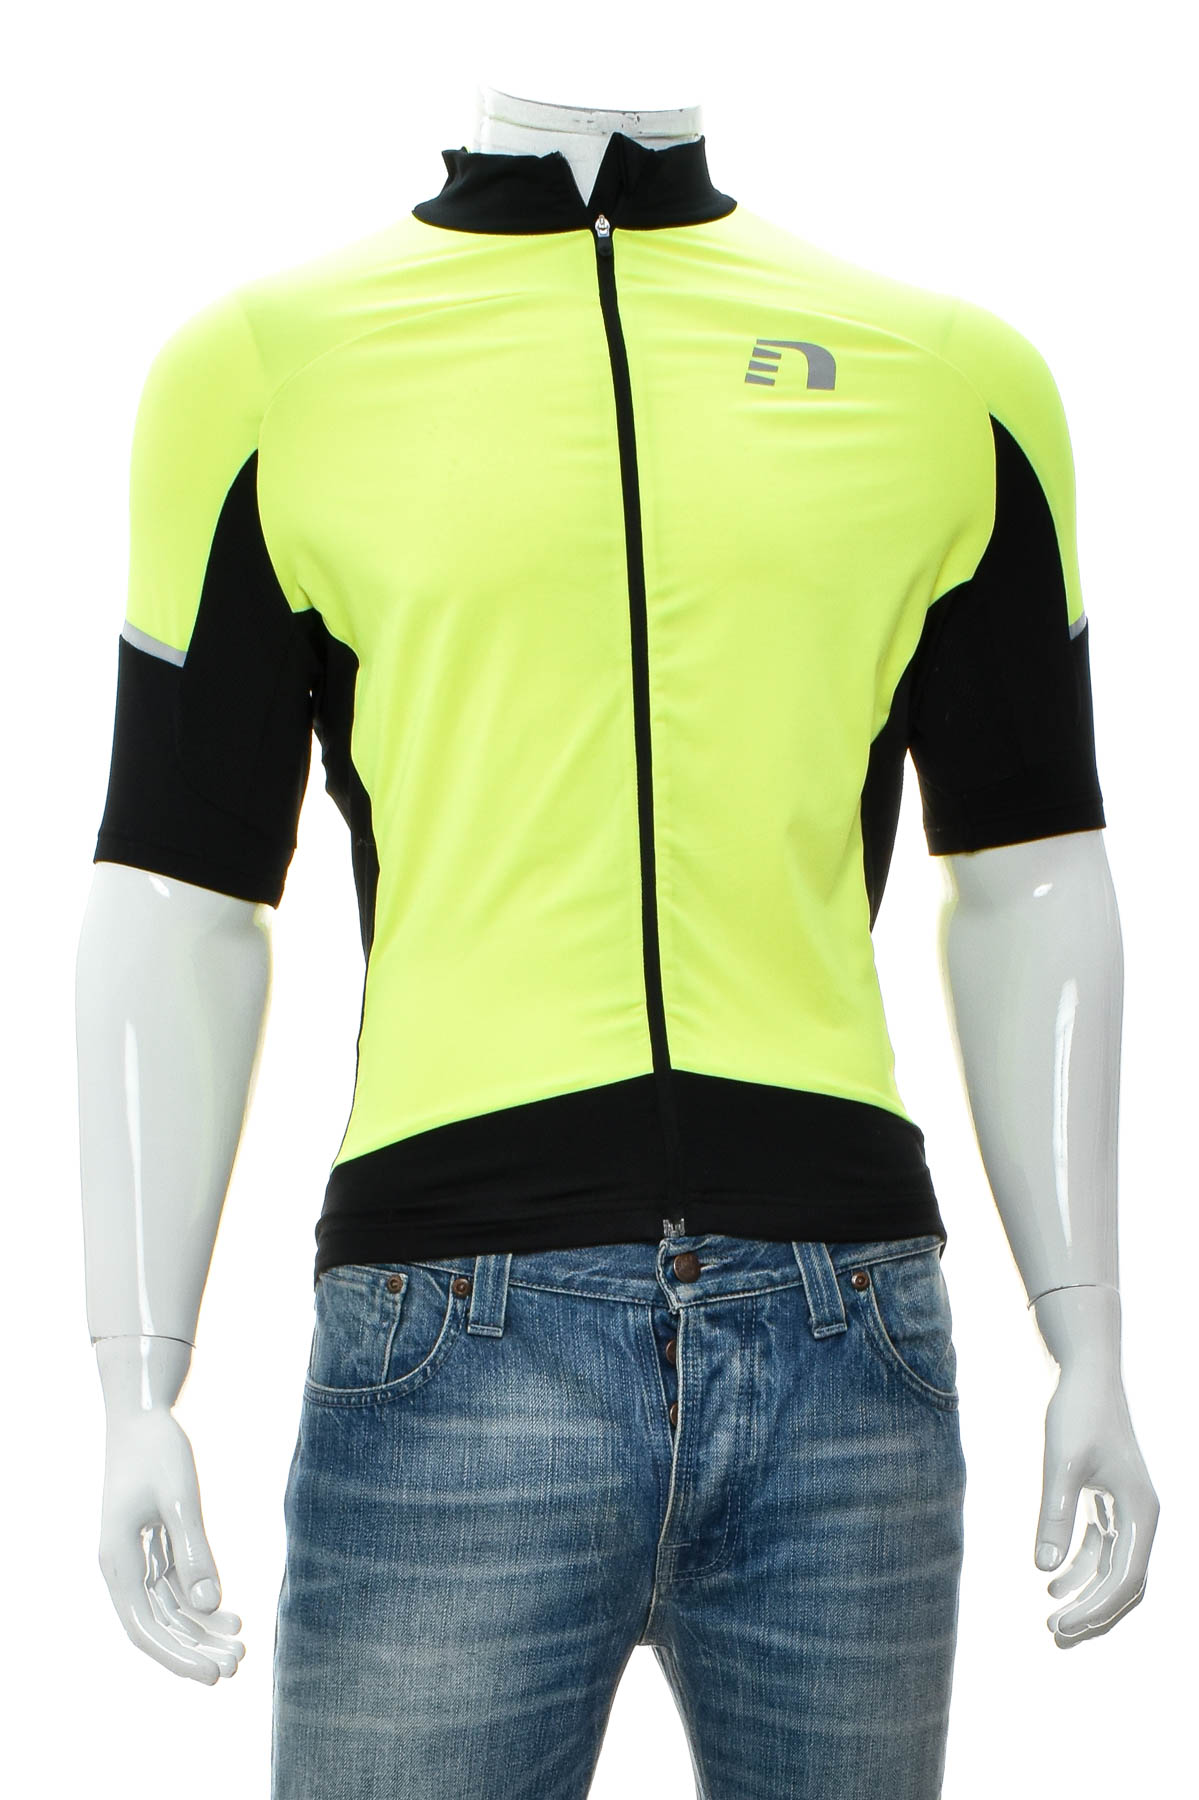 Male sports top for cycling - Newline - 0